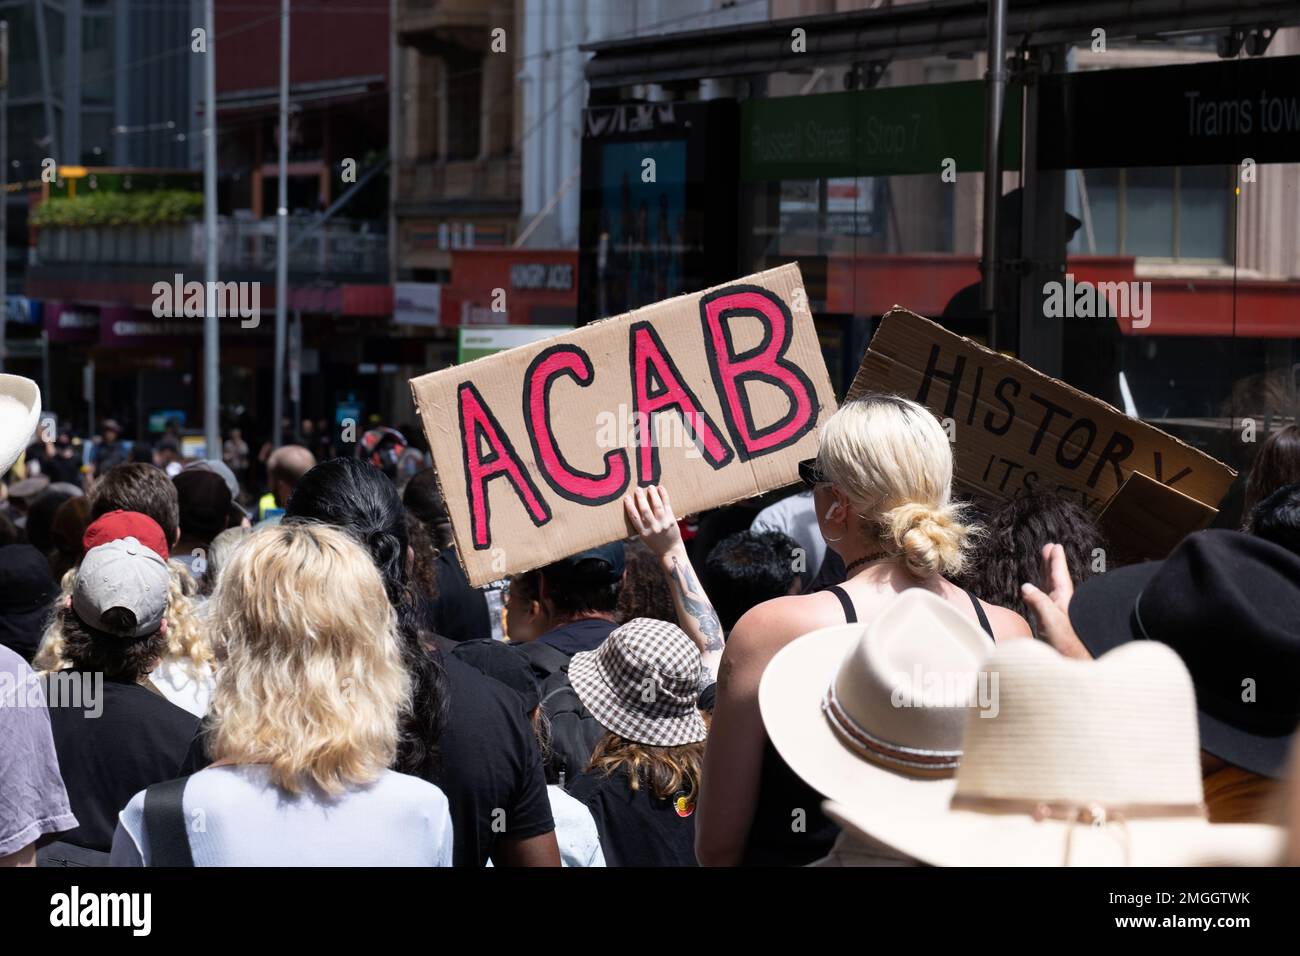 Melbourne Australia. 26th Jan 2023. Protests during Australia Day, sign showing anti-police sign. Adam G/Alamy Live News Stock Photo